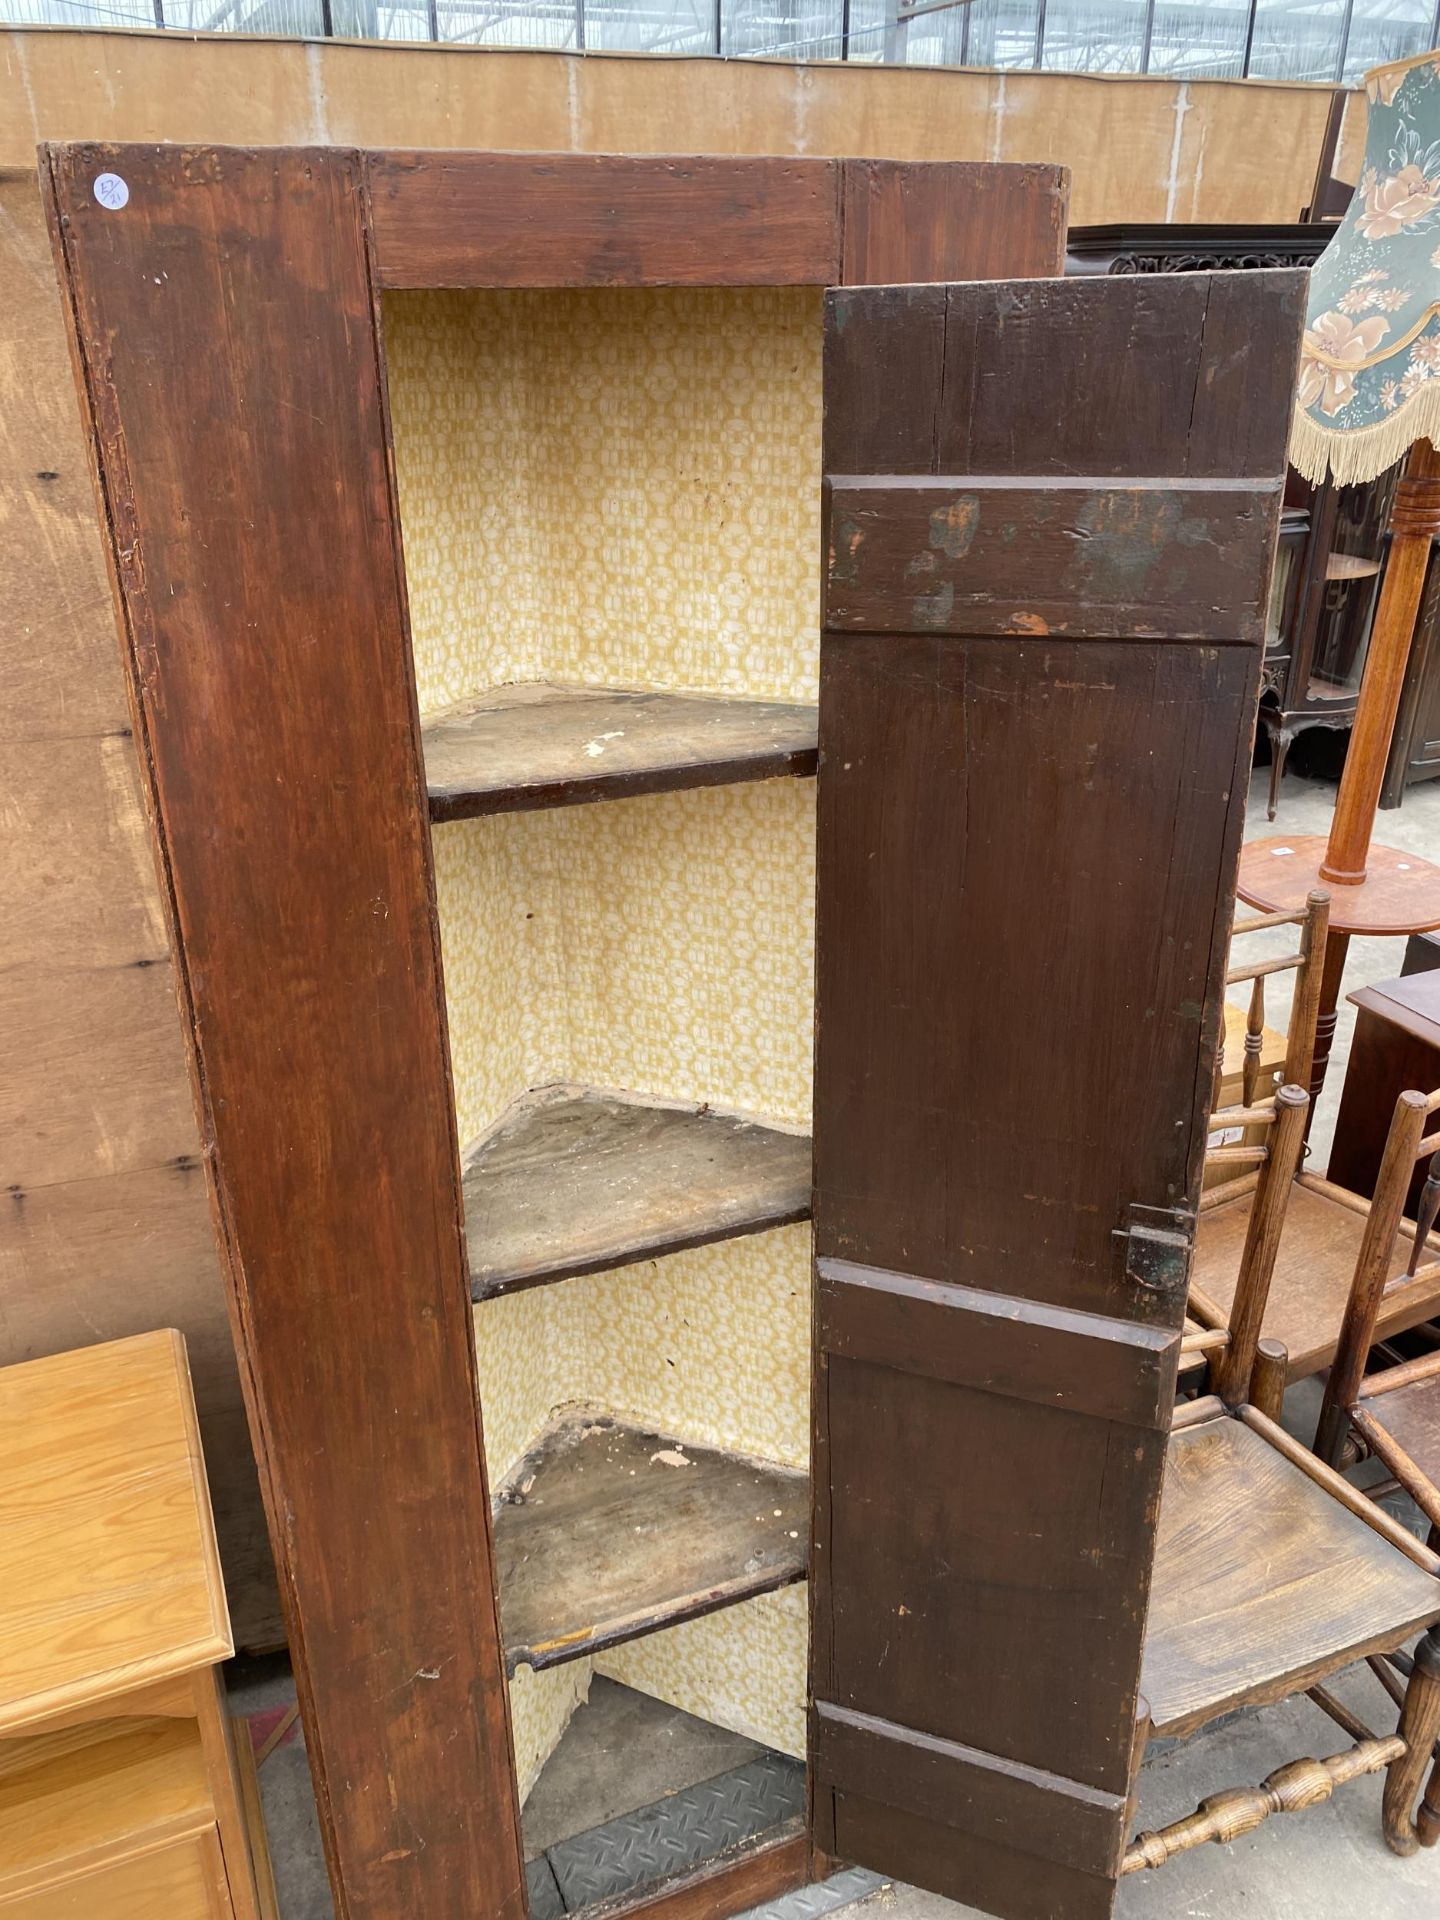 A 19TH CENTURY PAINTED CORNER CUPBOARD WITH H-HINGES, 28.5" WIDE - Image 3 of 3